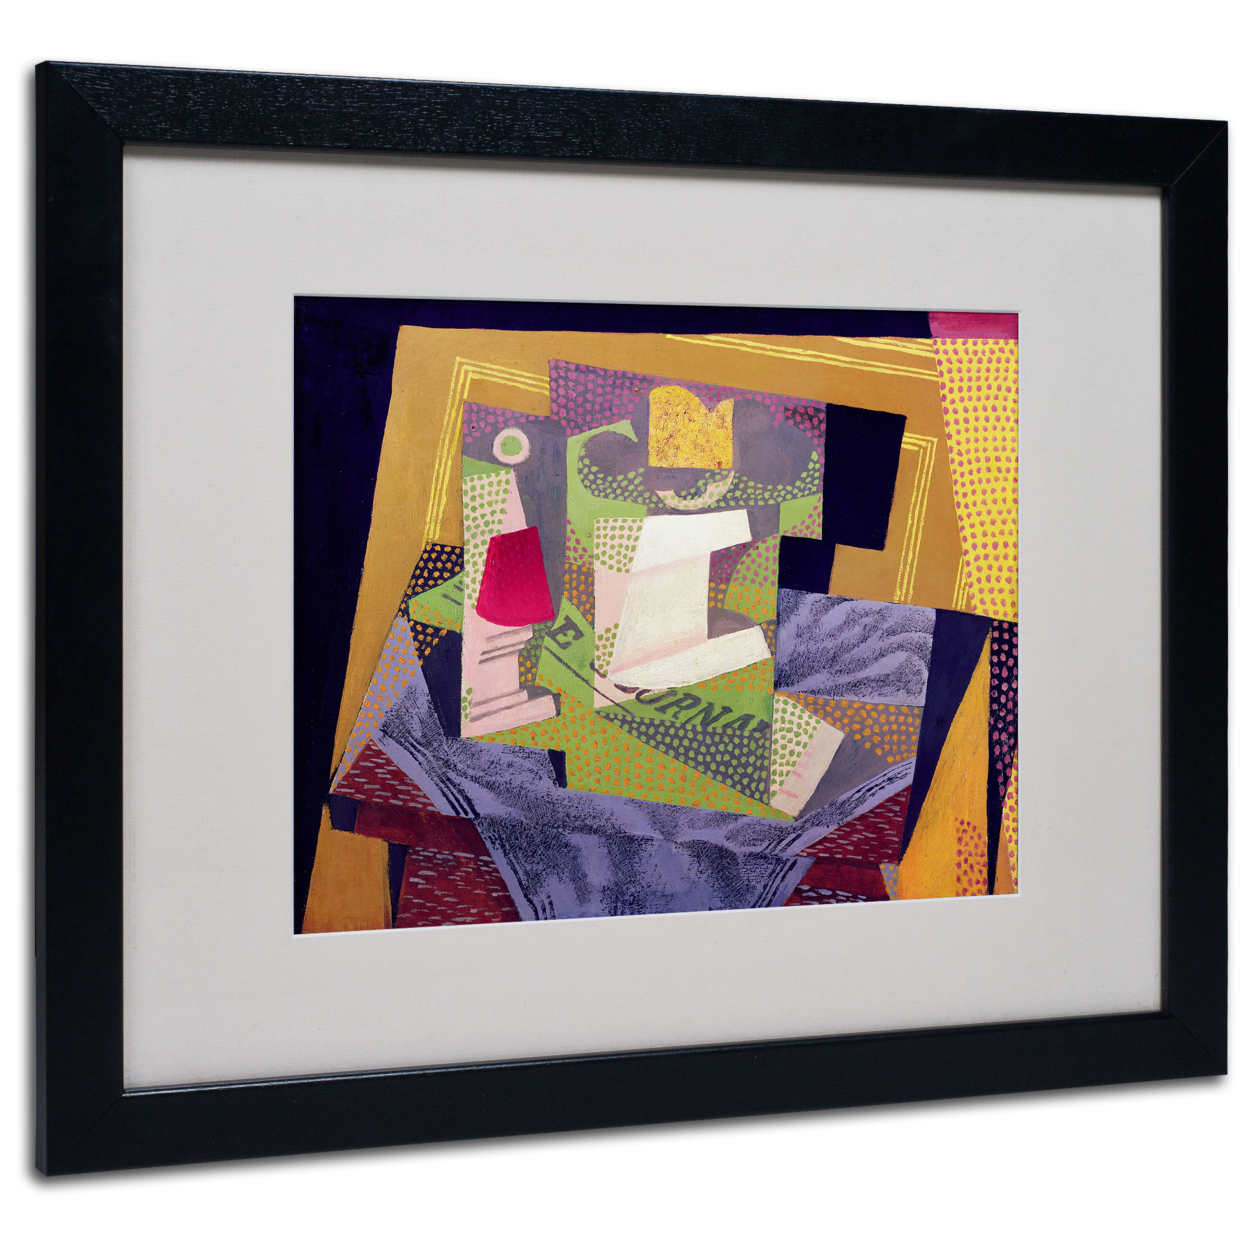 Juan Gris 'Composition On A Table 1916' Black Wooden Framed Art 18 X 22 Inches